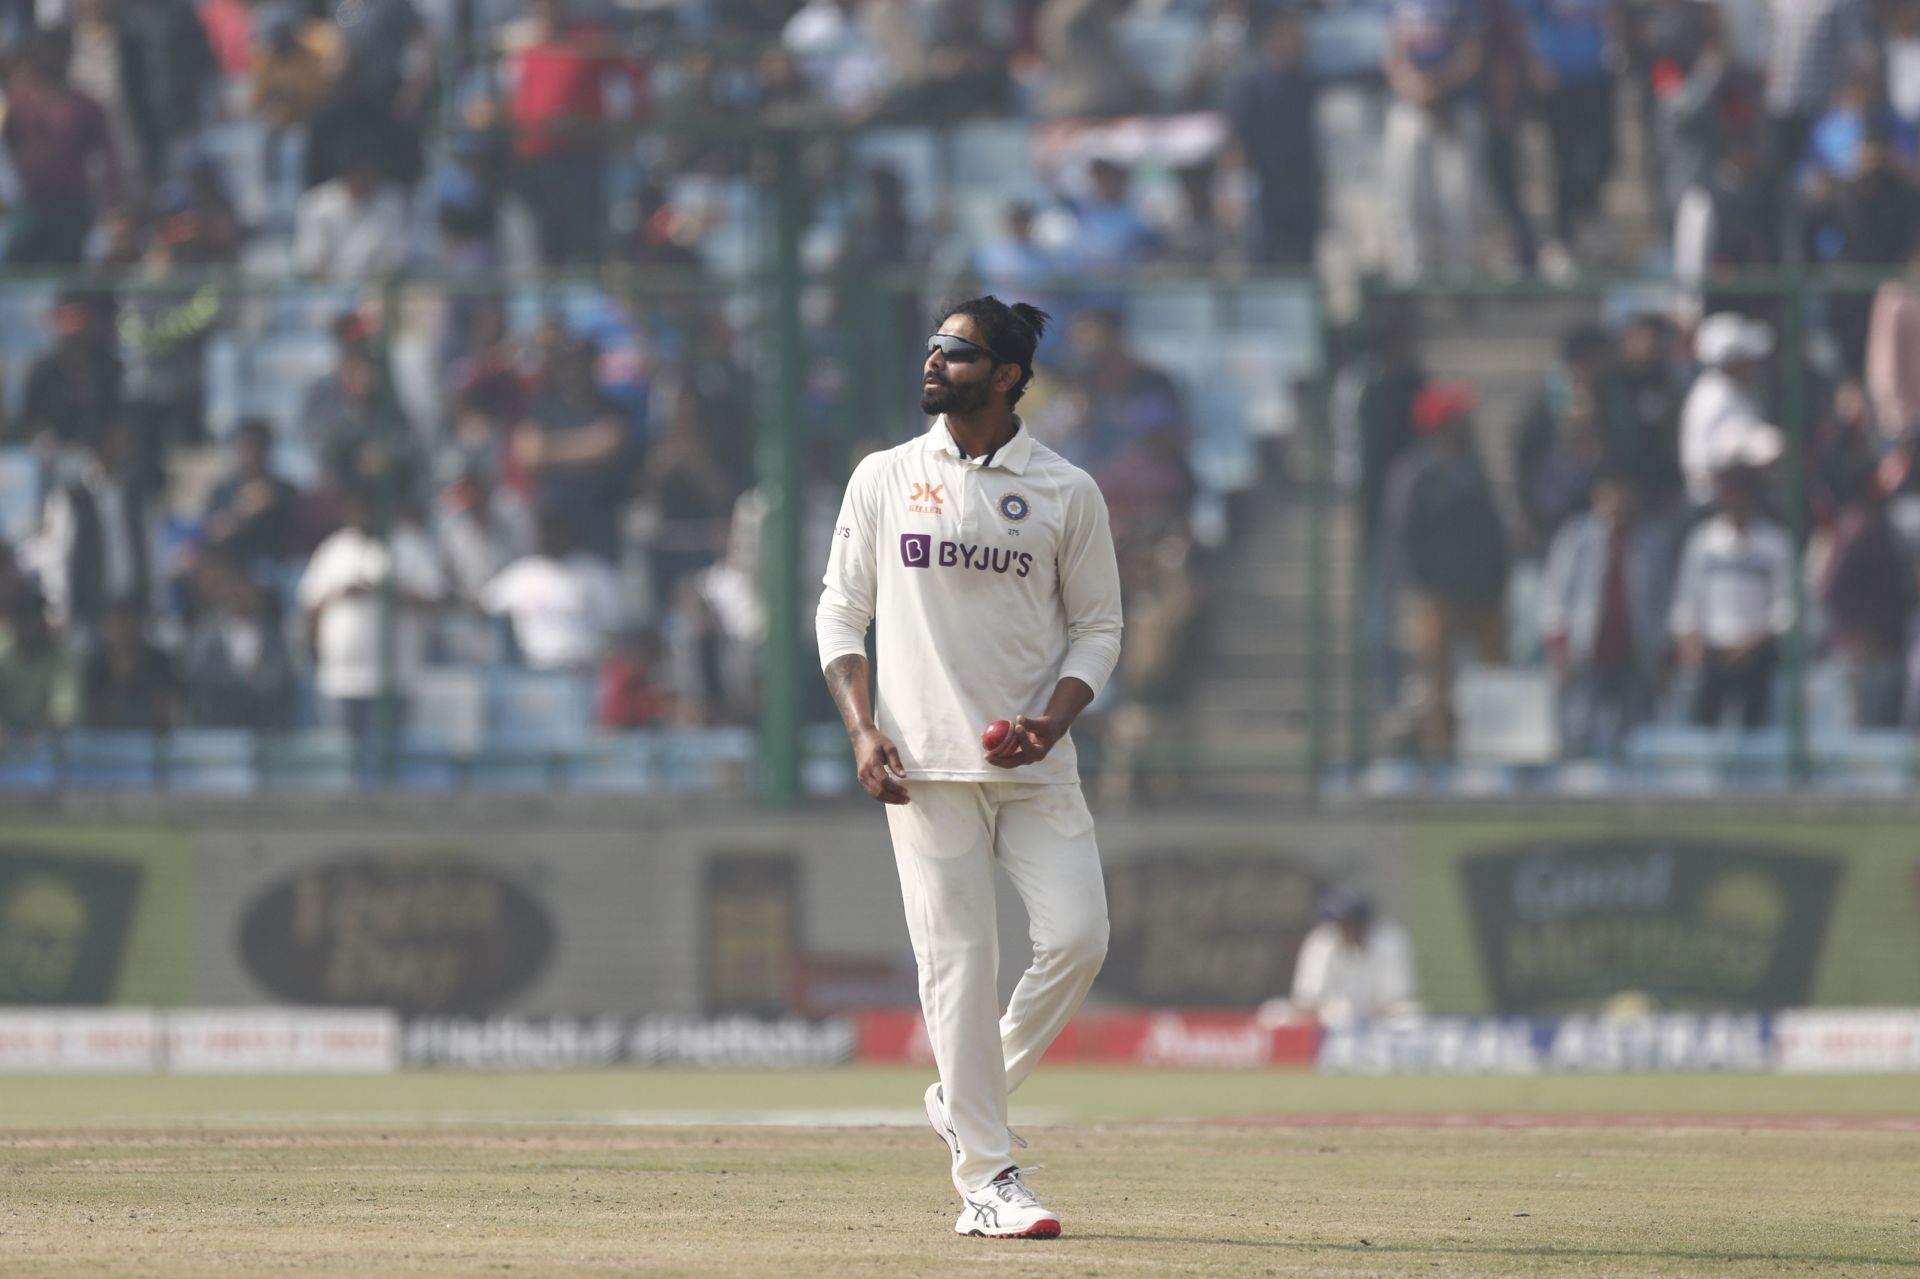 Ravindra Jadeja was the Player of the Match in the first two Tests against Australia.